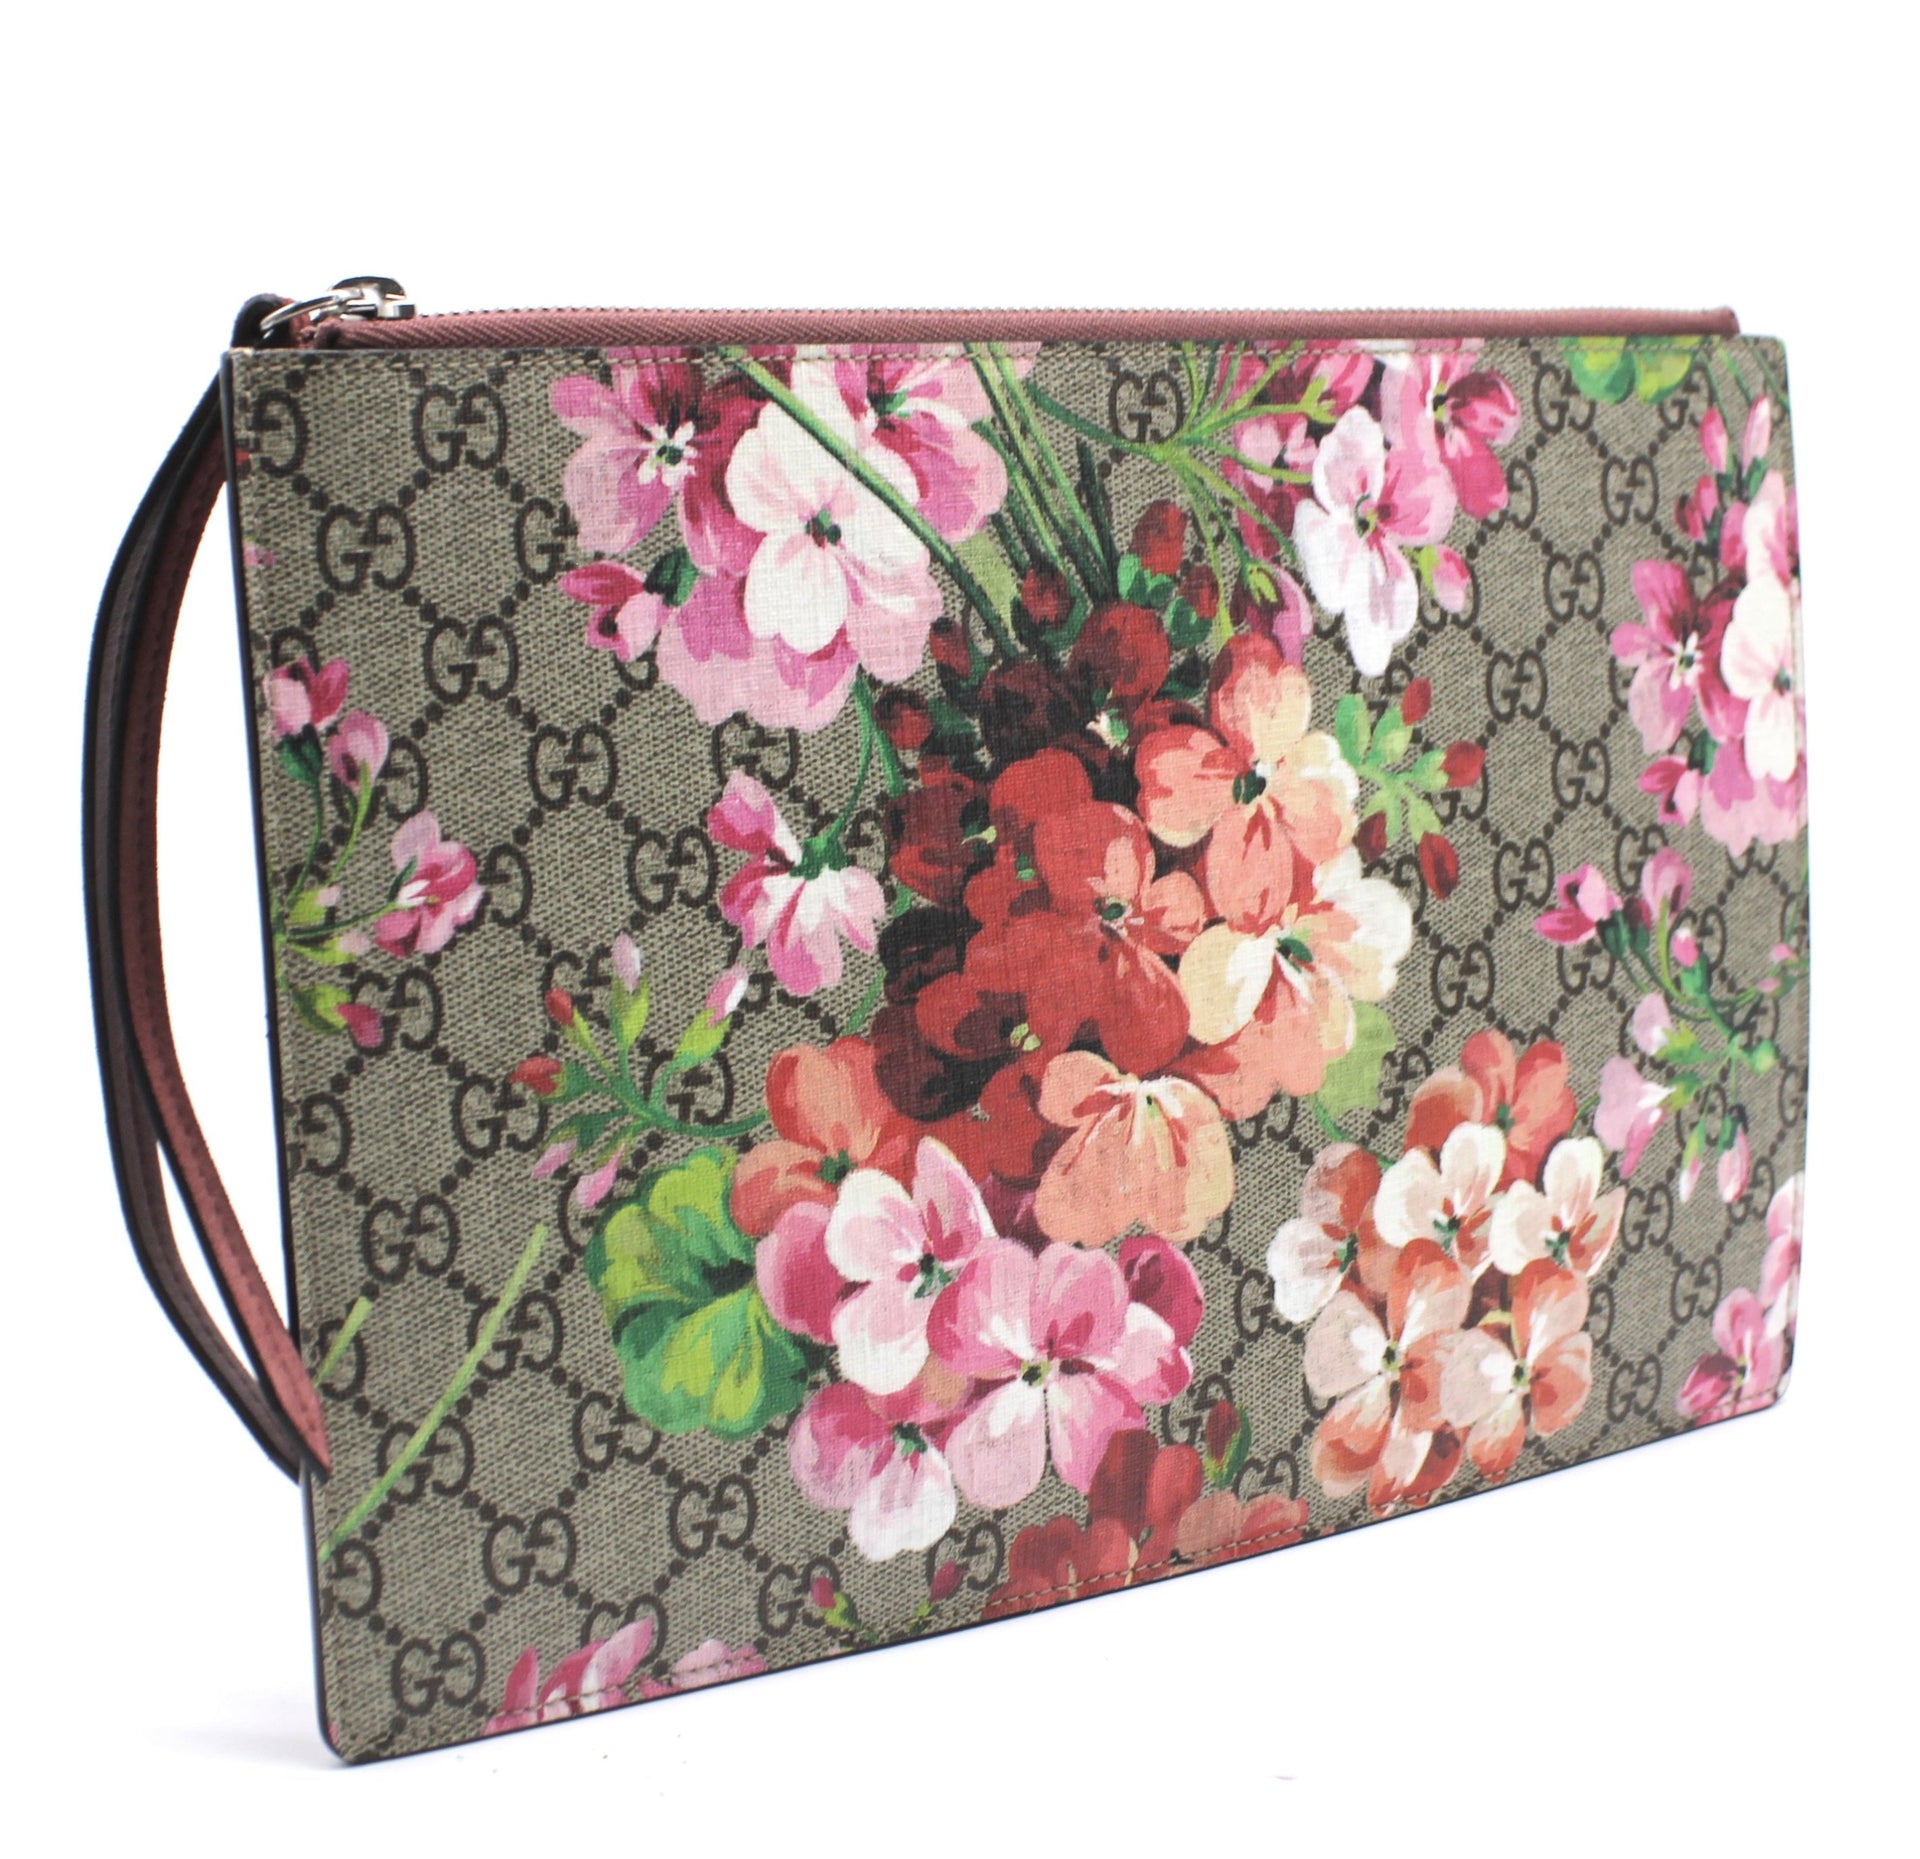 Gucci GG Blooms pouch